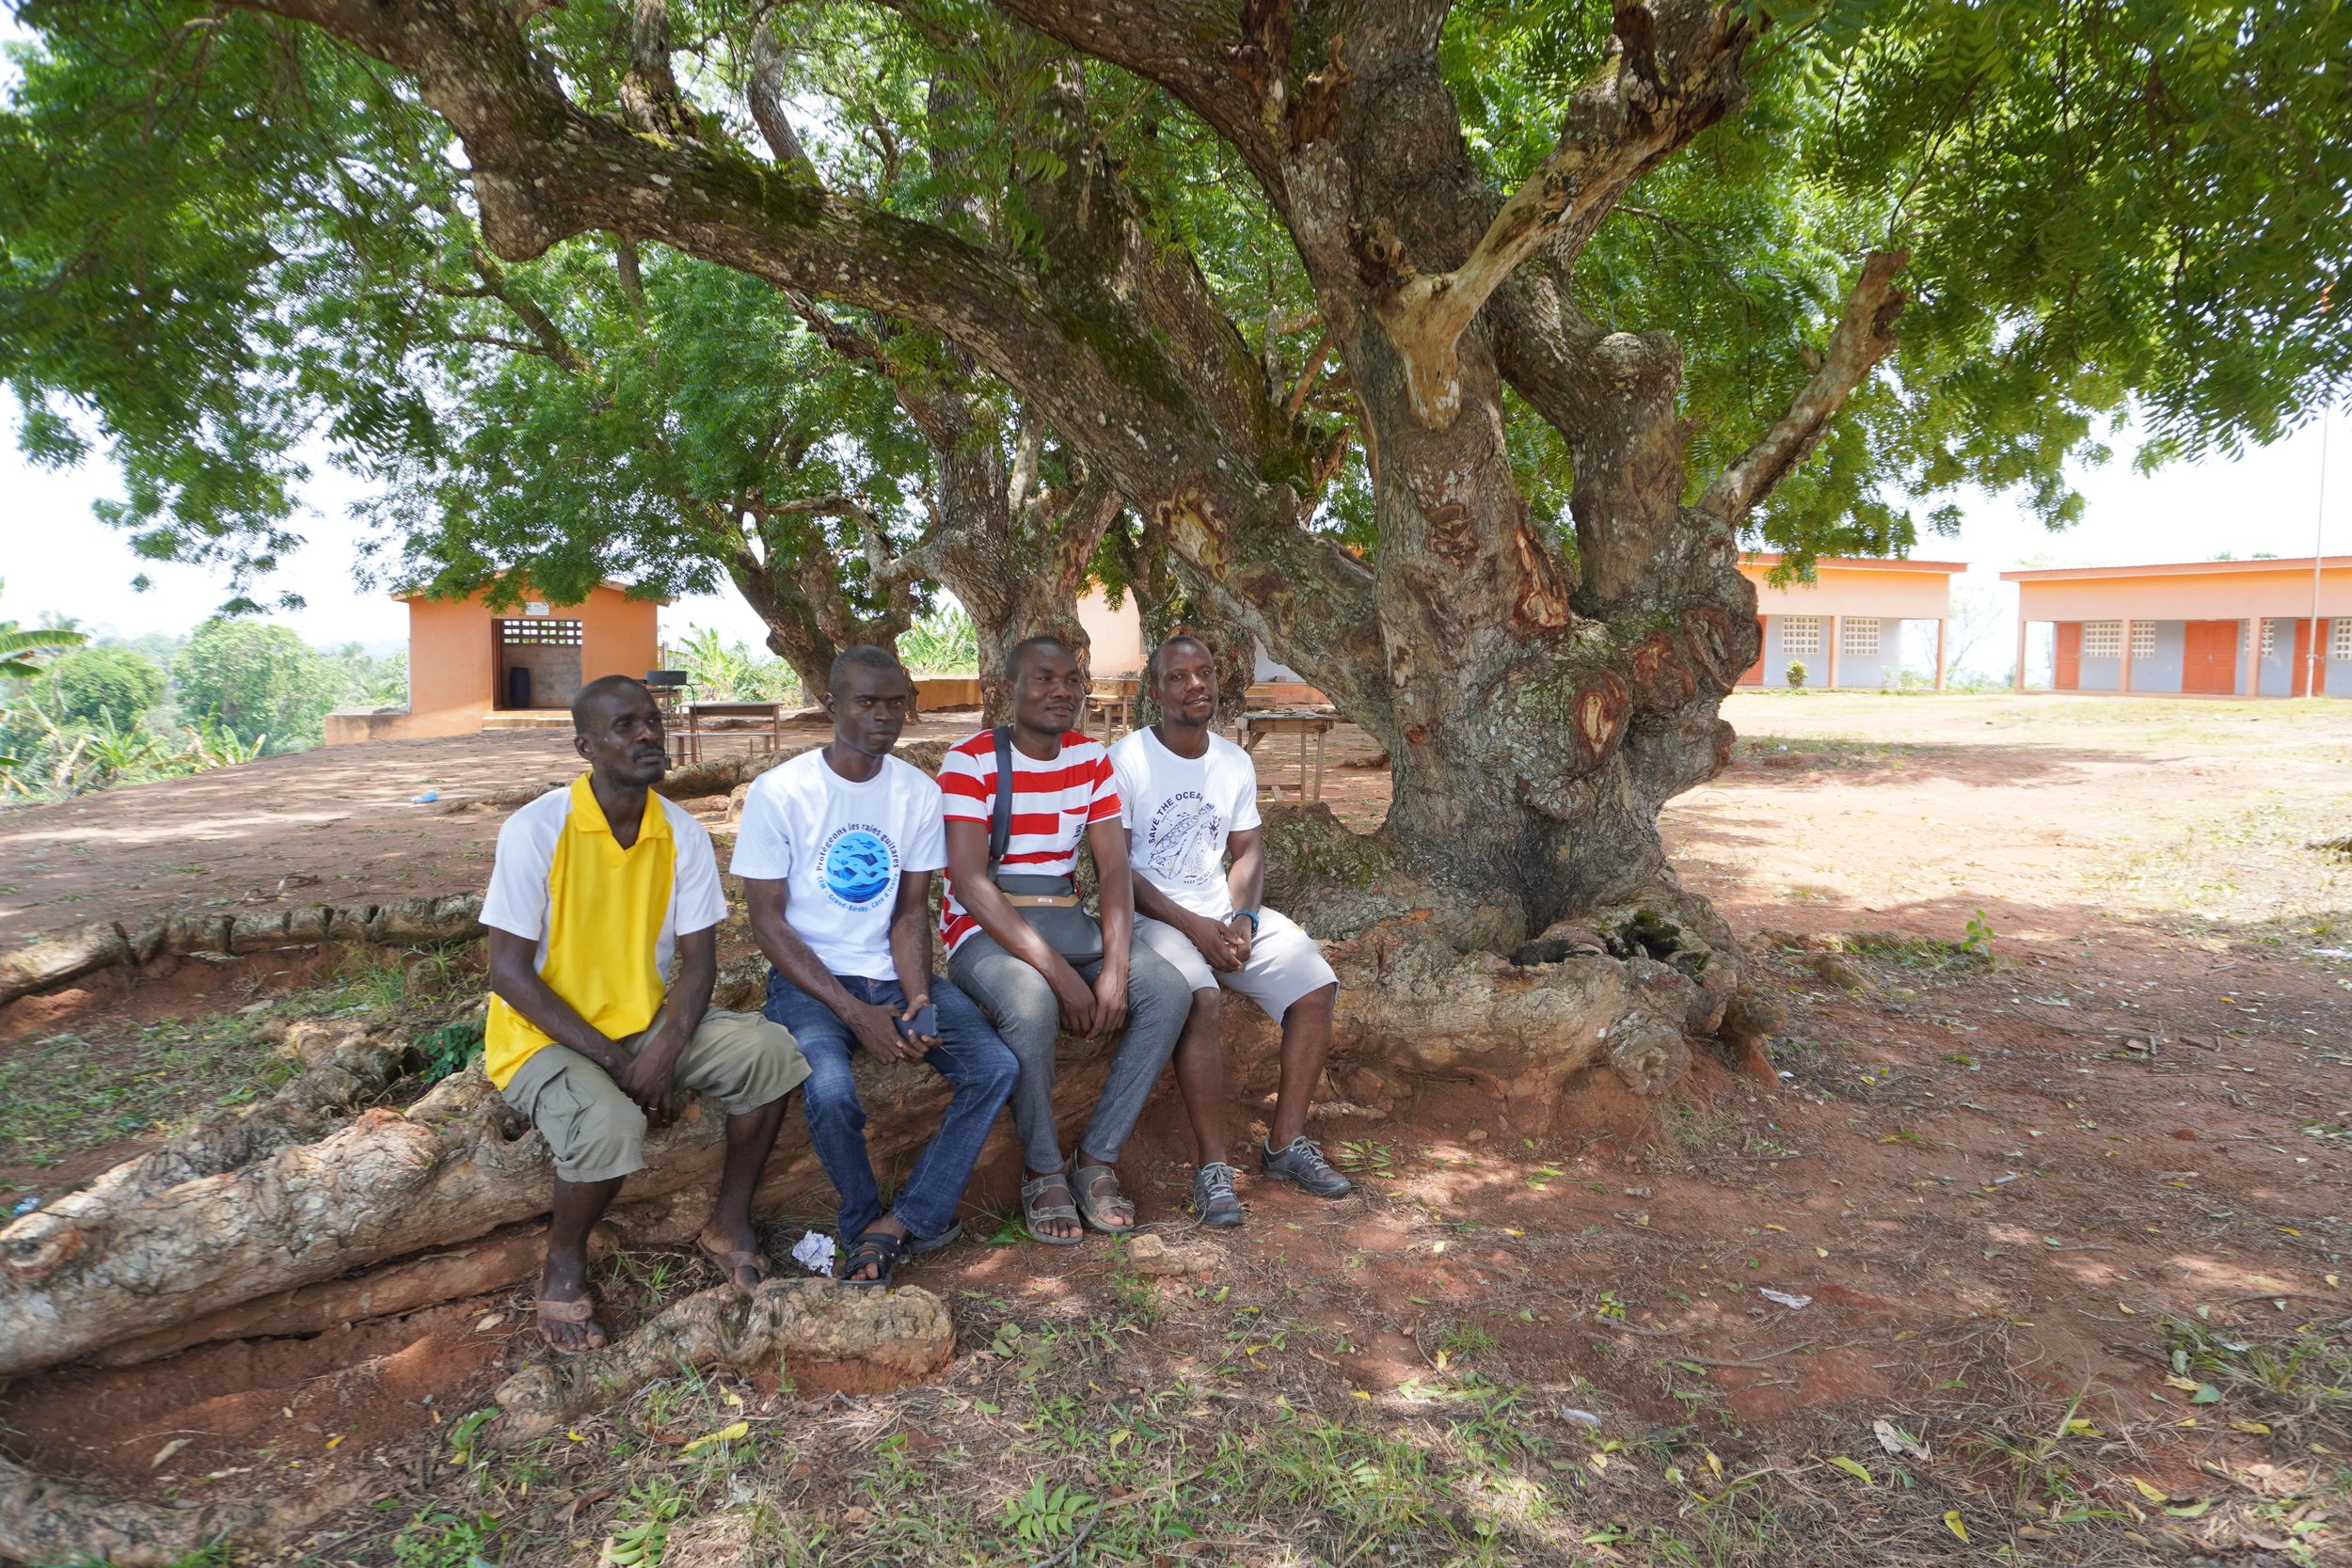  From left to right, Alex Nabo, fourth deputy headmaster of the school, Abel Gba, from the CEM, Evariste Gbadou, second deputy headmaster, and Picard Amiral, Roc's focal point for the CEM in the courtyard of the Roc school, rehabilitated by the Orang